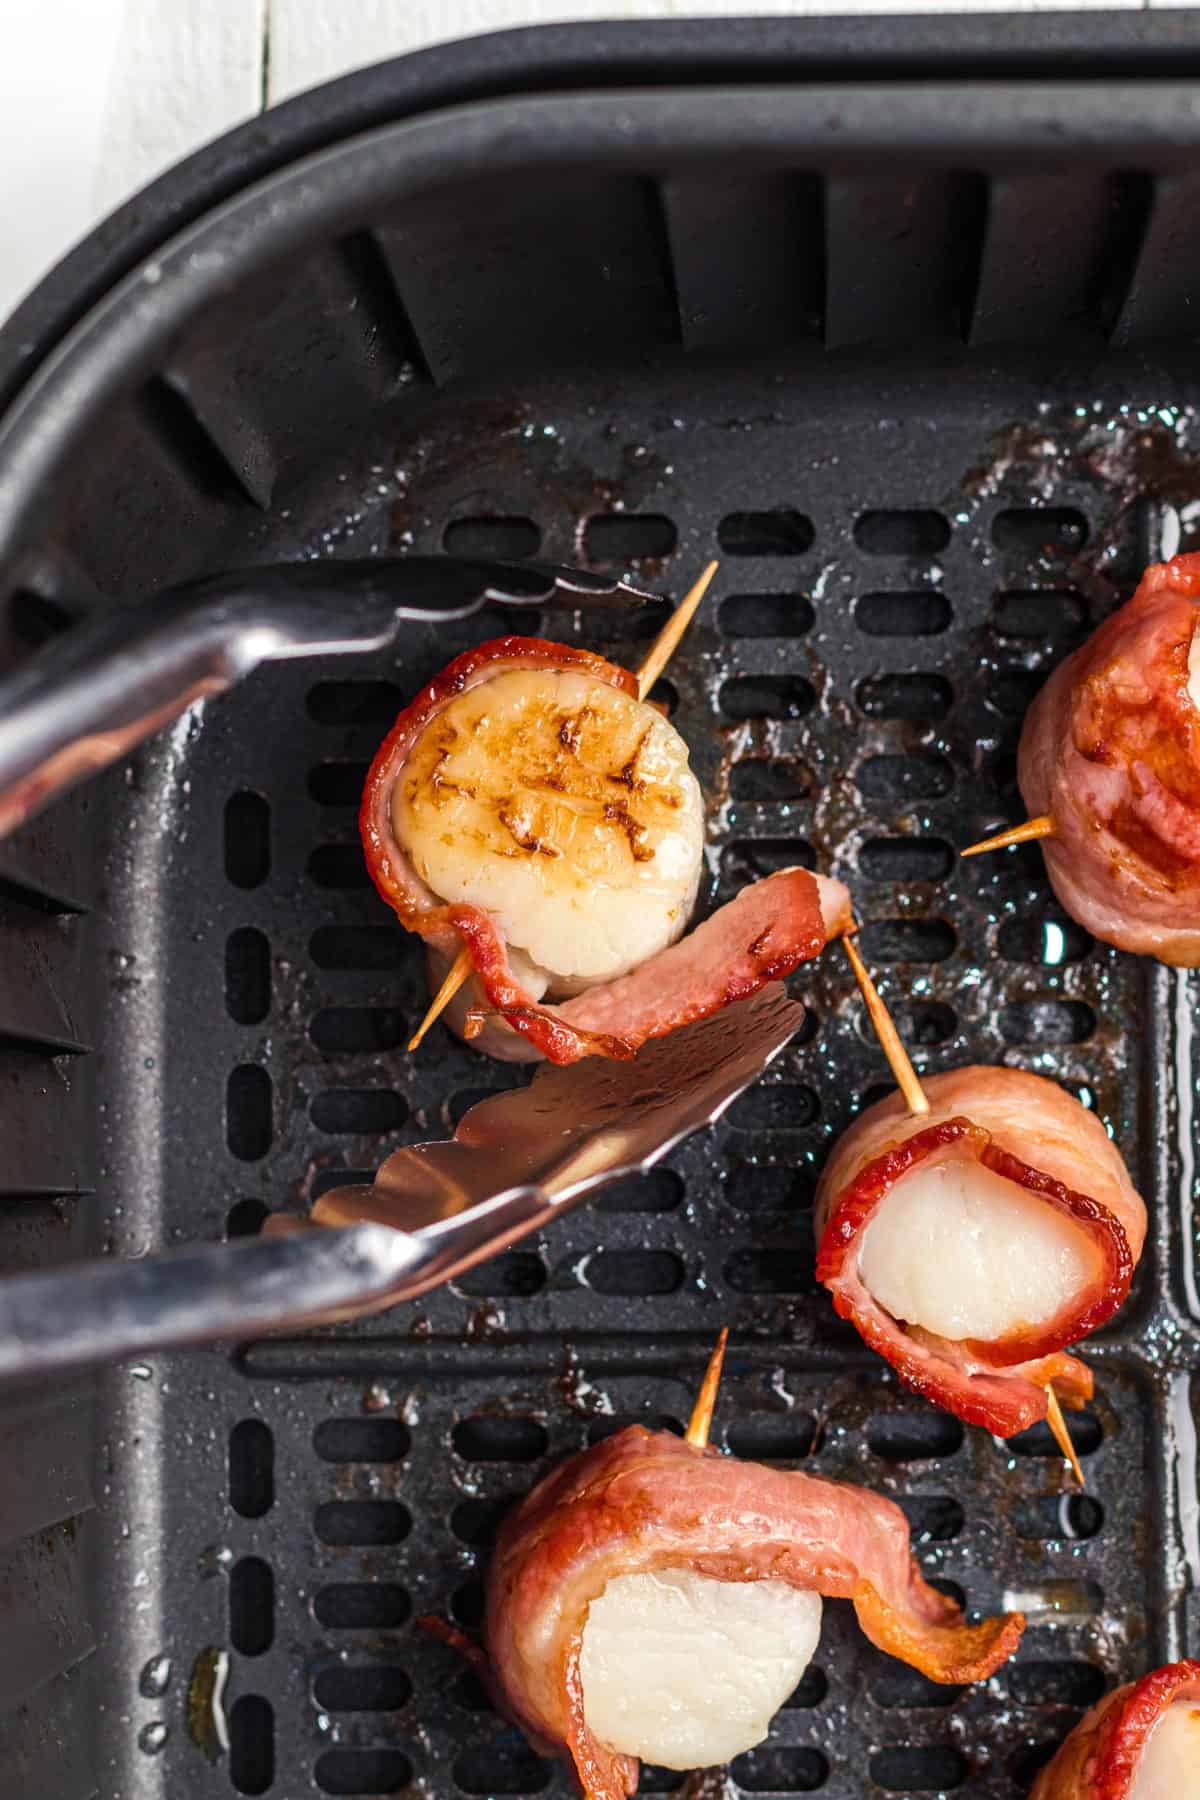 Removing bacon-wrapped scallops from an air fryer using tongs.